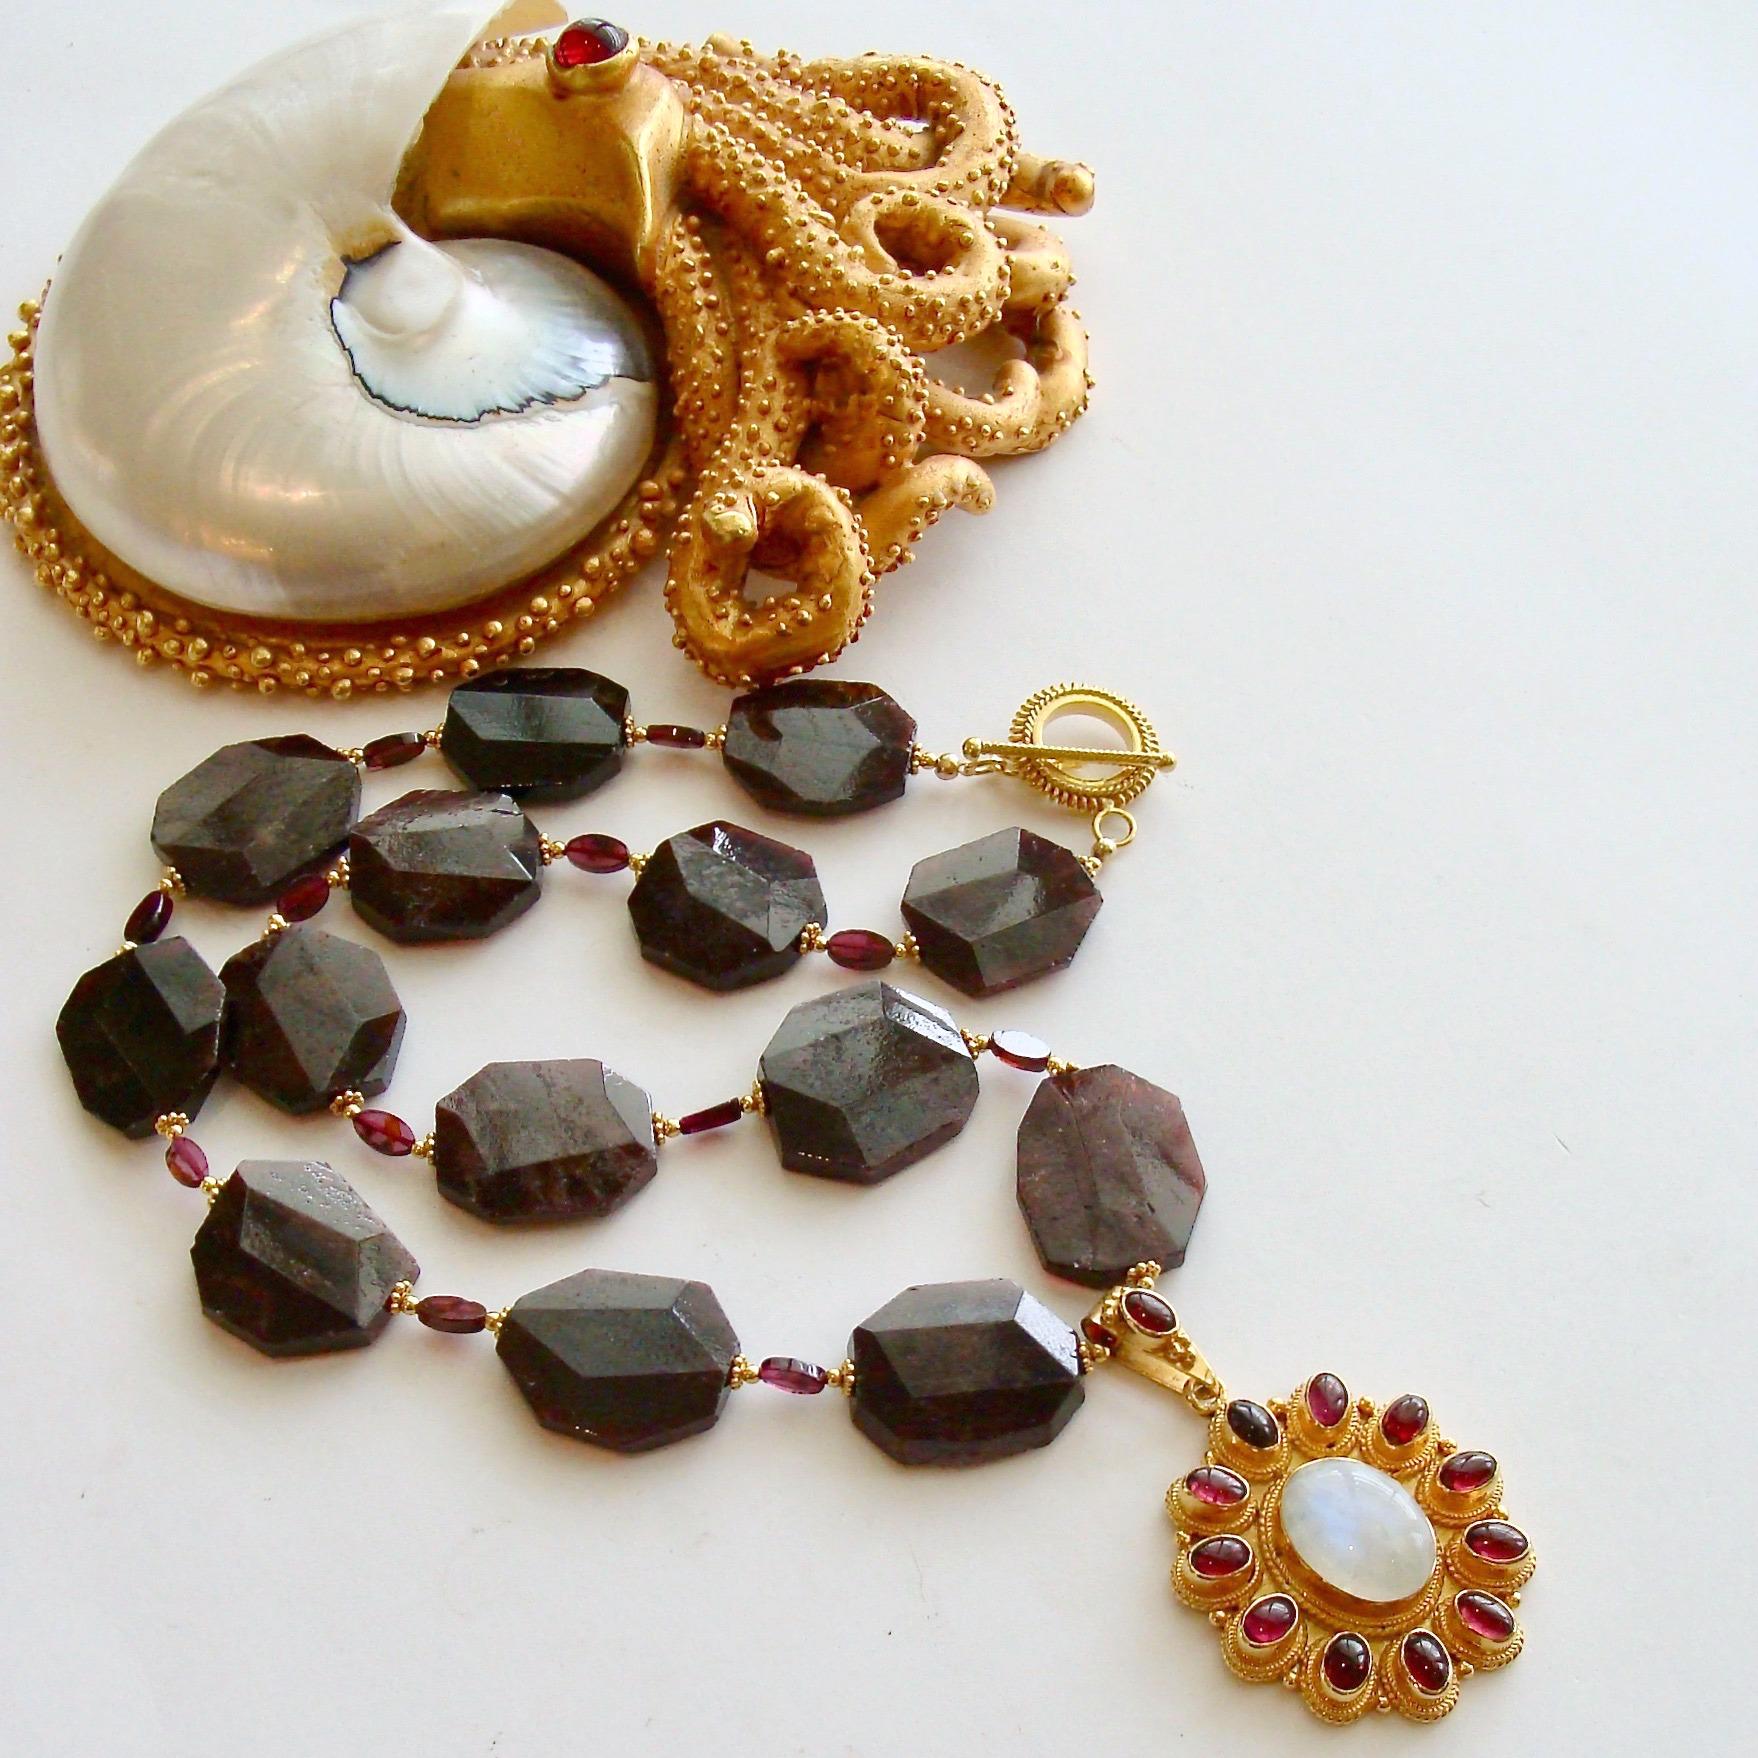 A unique suite of raw, yet faceted garnet slices, displays the beauty of these generous stones and their deep rich color.  These semi-precious gem stones become more approachable when they are shown in their more natural state - including striations